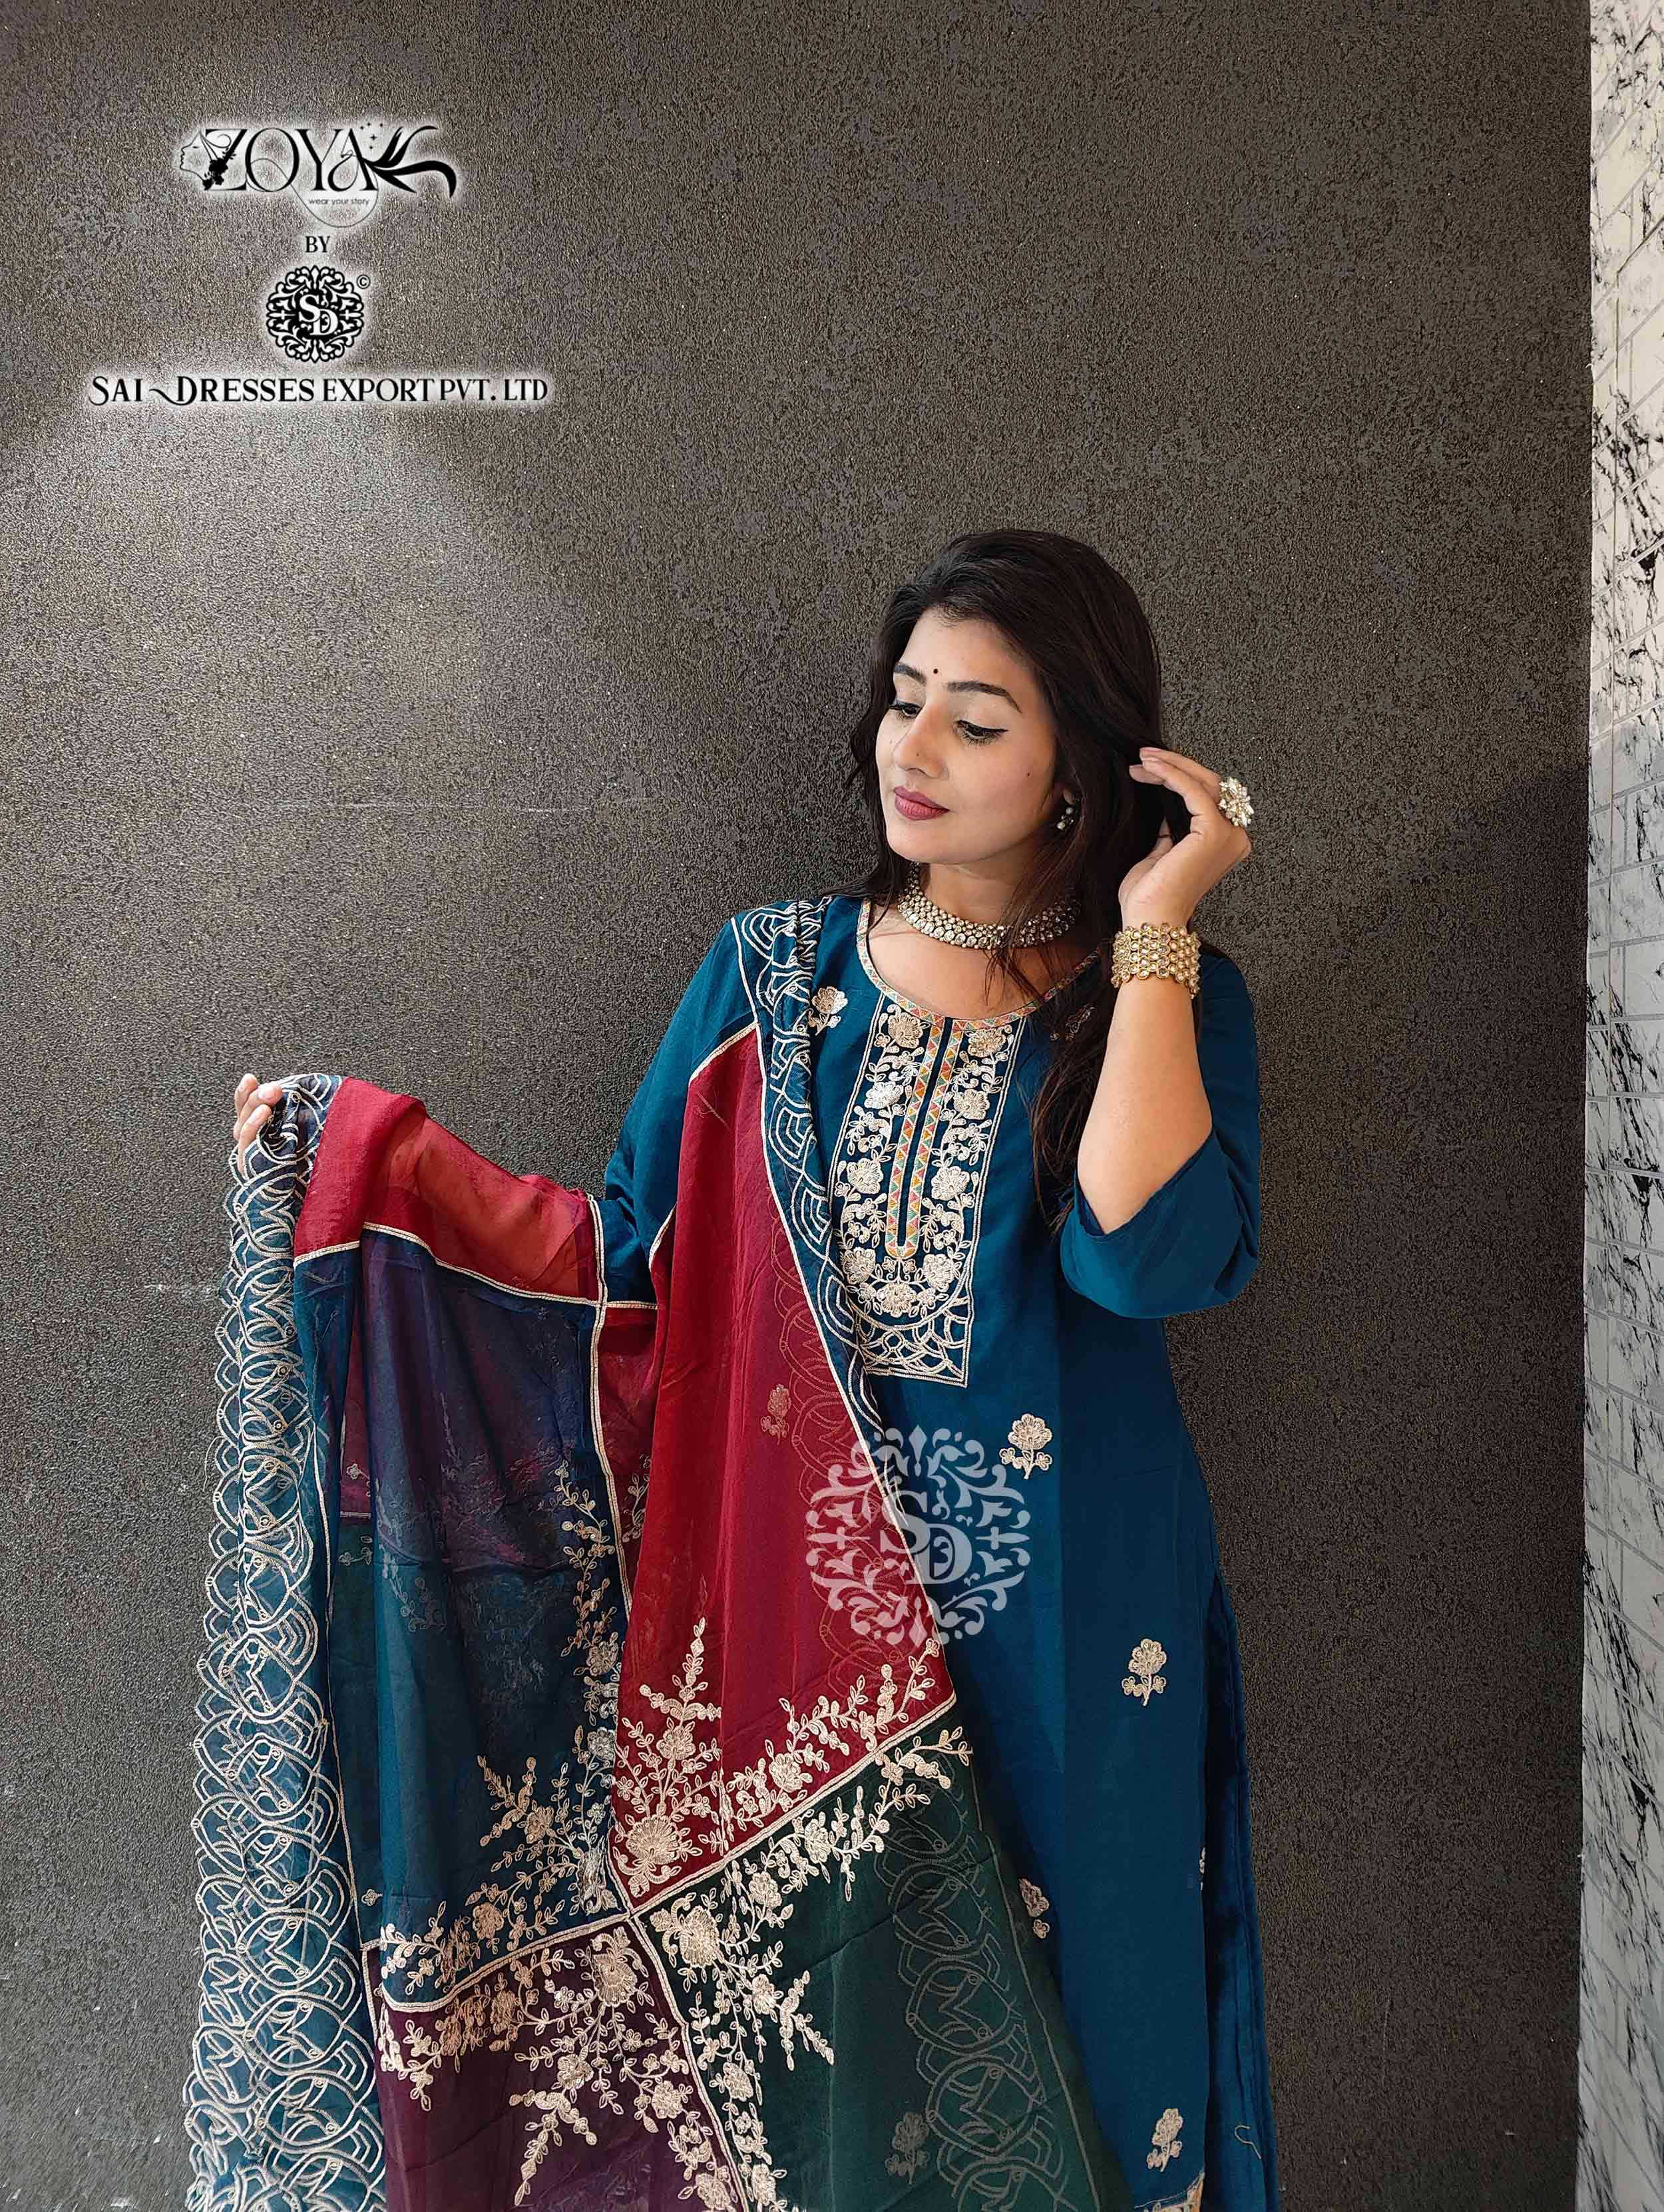 SAI DRESSES PRESENT D.NO SD1044 TO SD1047 READY TO EXCLUSIVE FESTIVE WEAR DESIGNER PAKISTANI 3 PIECE CONCEPT COMBO COLLECTION IN WHOLESALE RATE IN SURAT